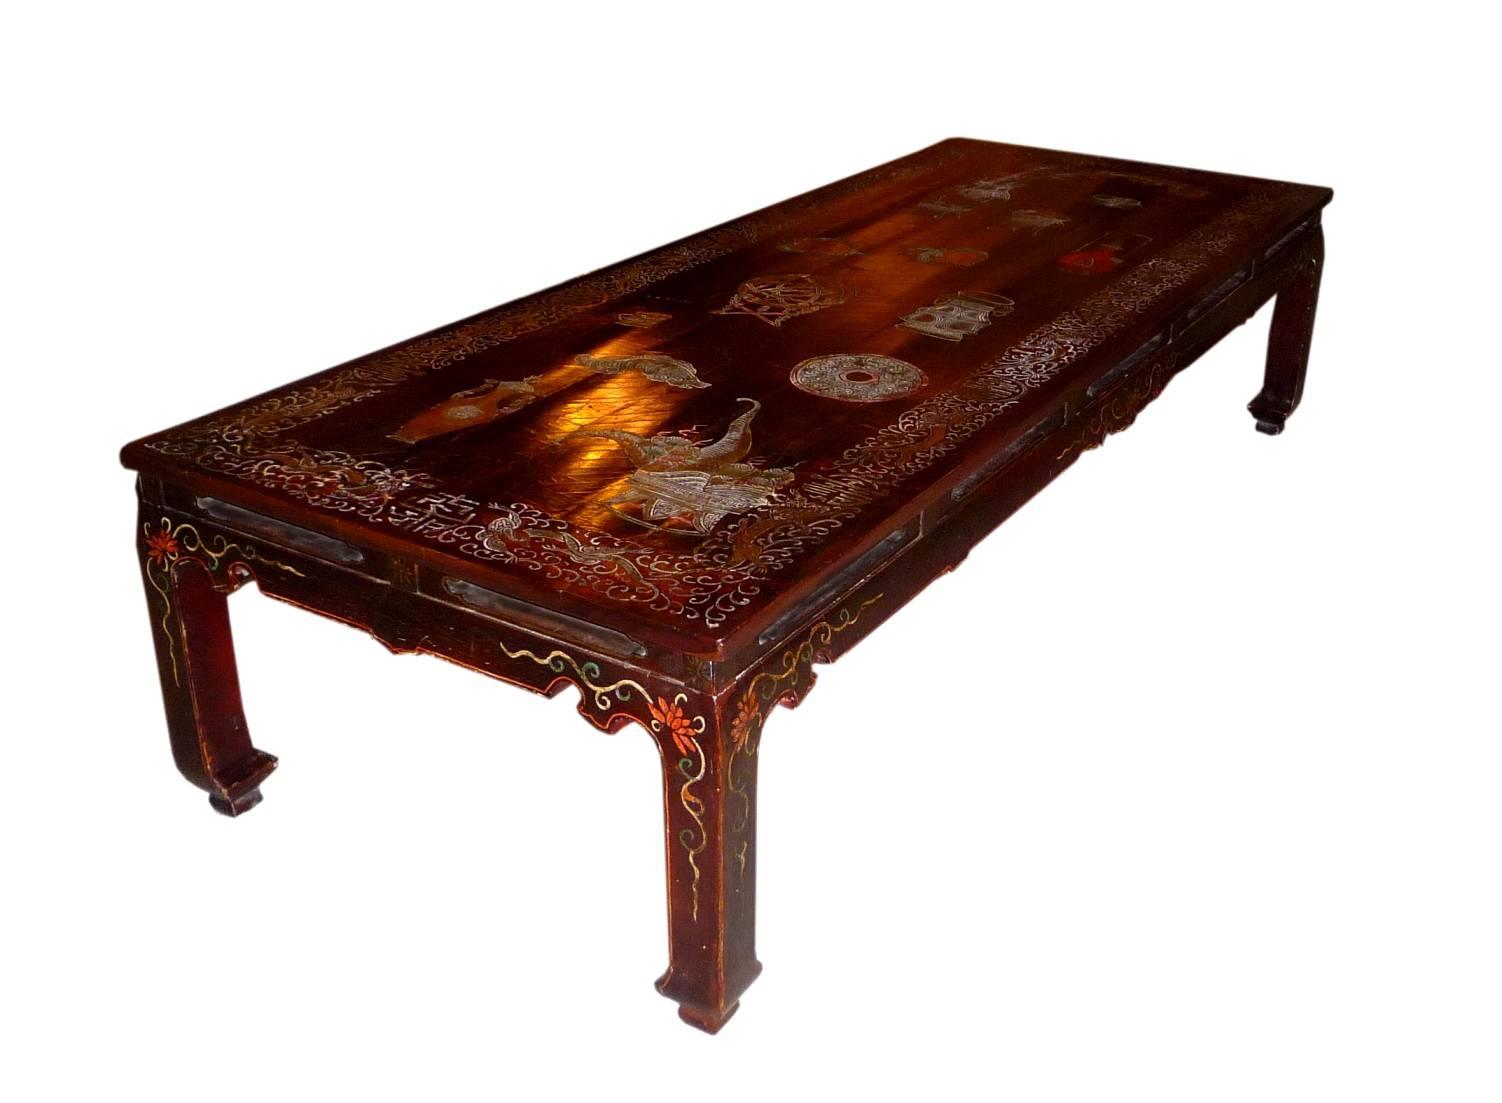 A French large and fine coffee table created, circa 1920-1930. The top tray is Chinese Coromandel lacquer panel with decor of vases and an armillary sphere (18th century.)